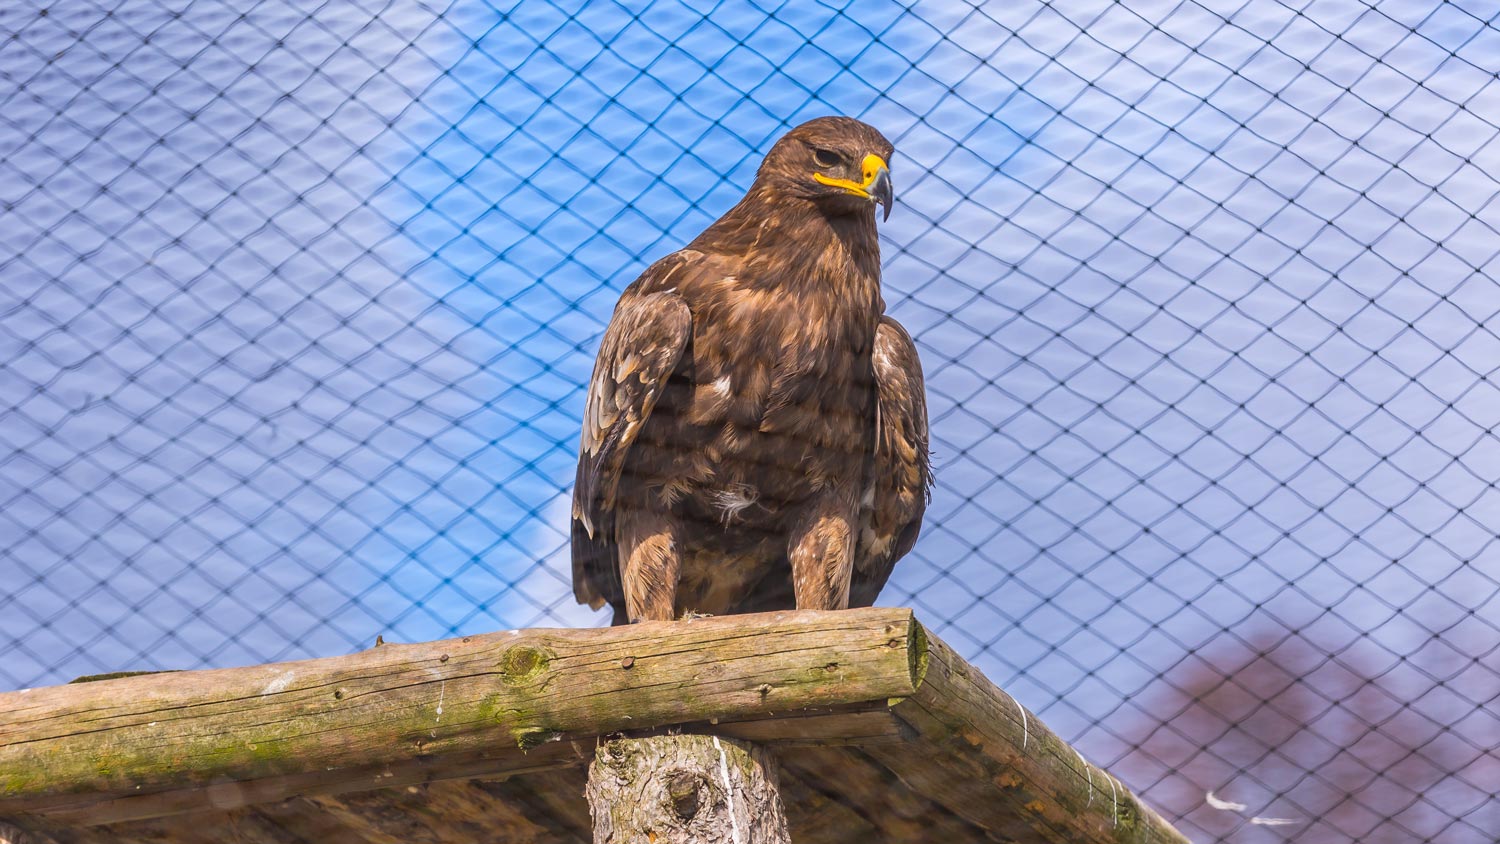 A brown eagle standing on a wood ledge